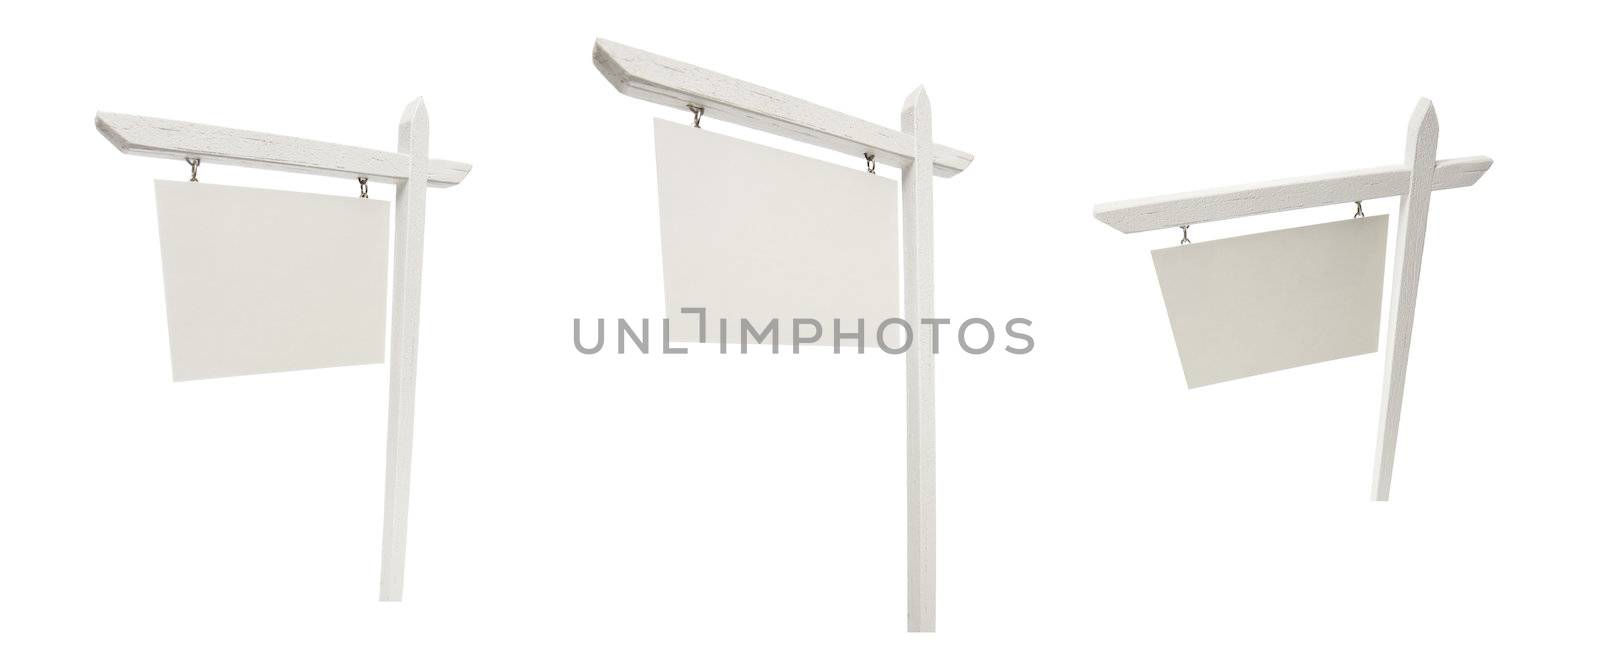 Set of 3 Different Angled Blank Real Estate Signs with Clipping Path Isolated on White.